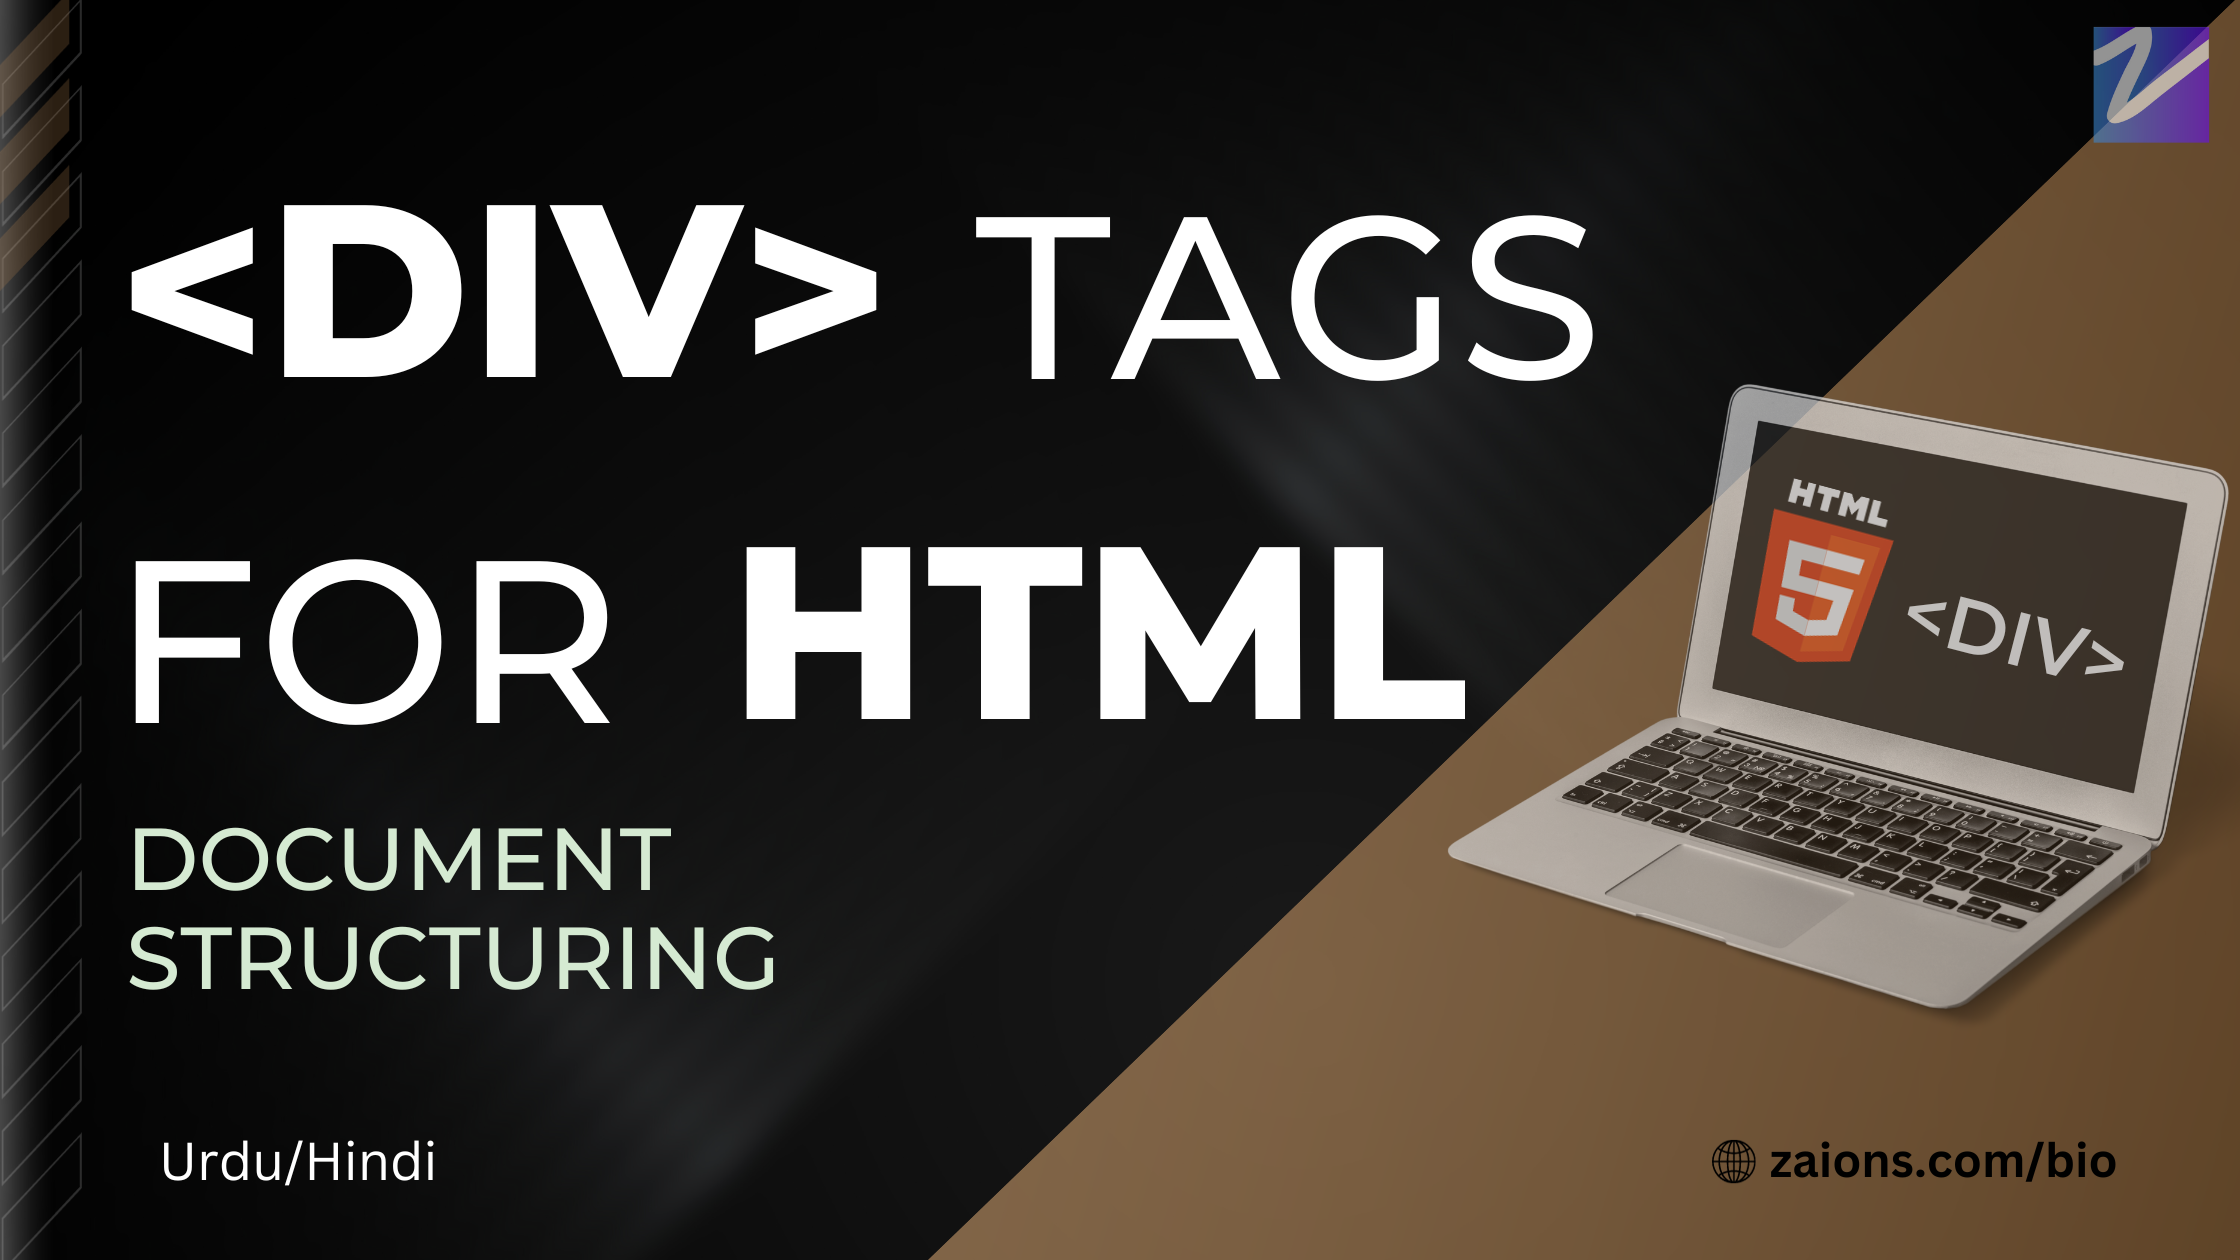 div-tags-for-html-document-structuring-zaions-aoneahsan-ahsanmahmood